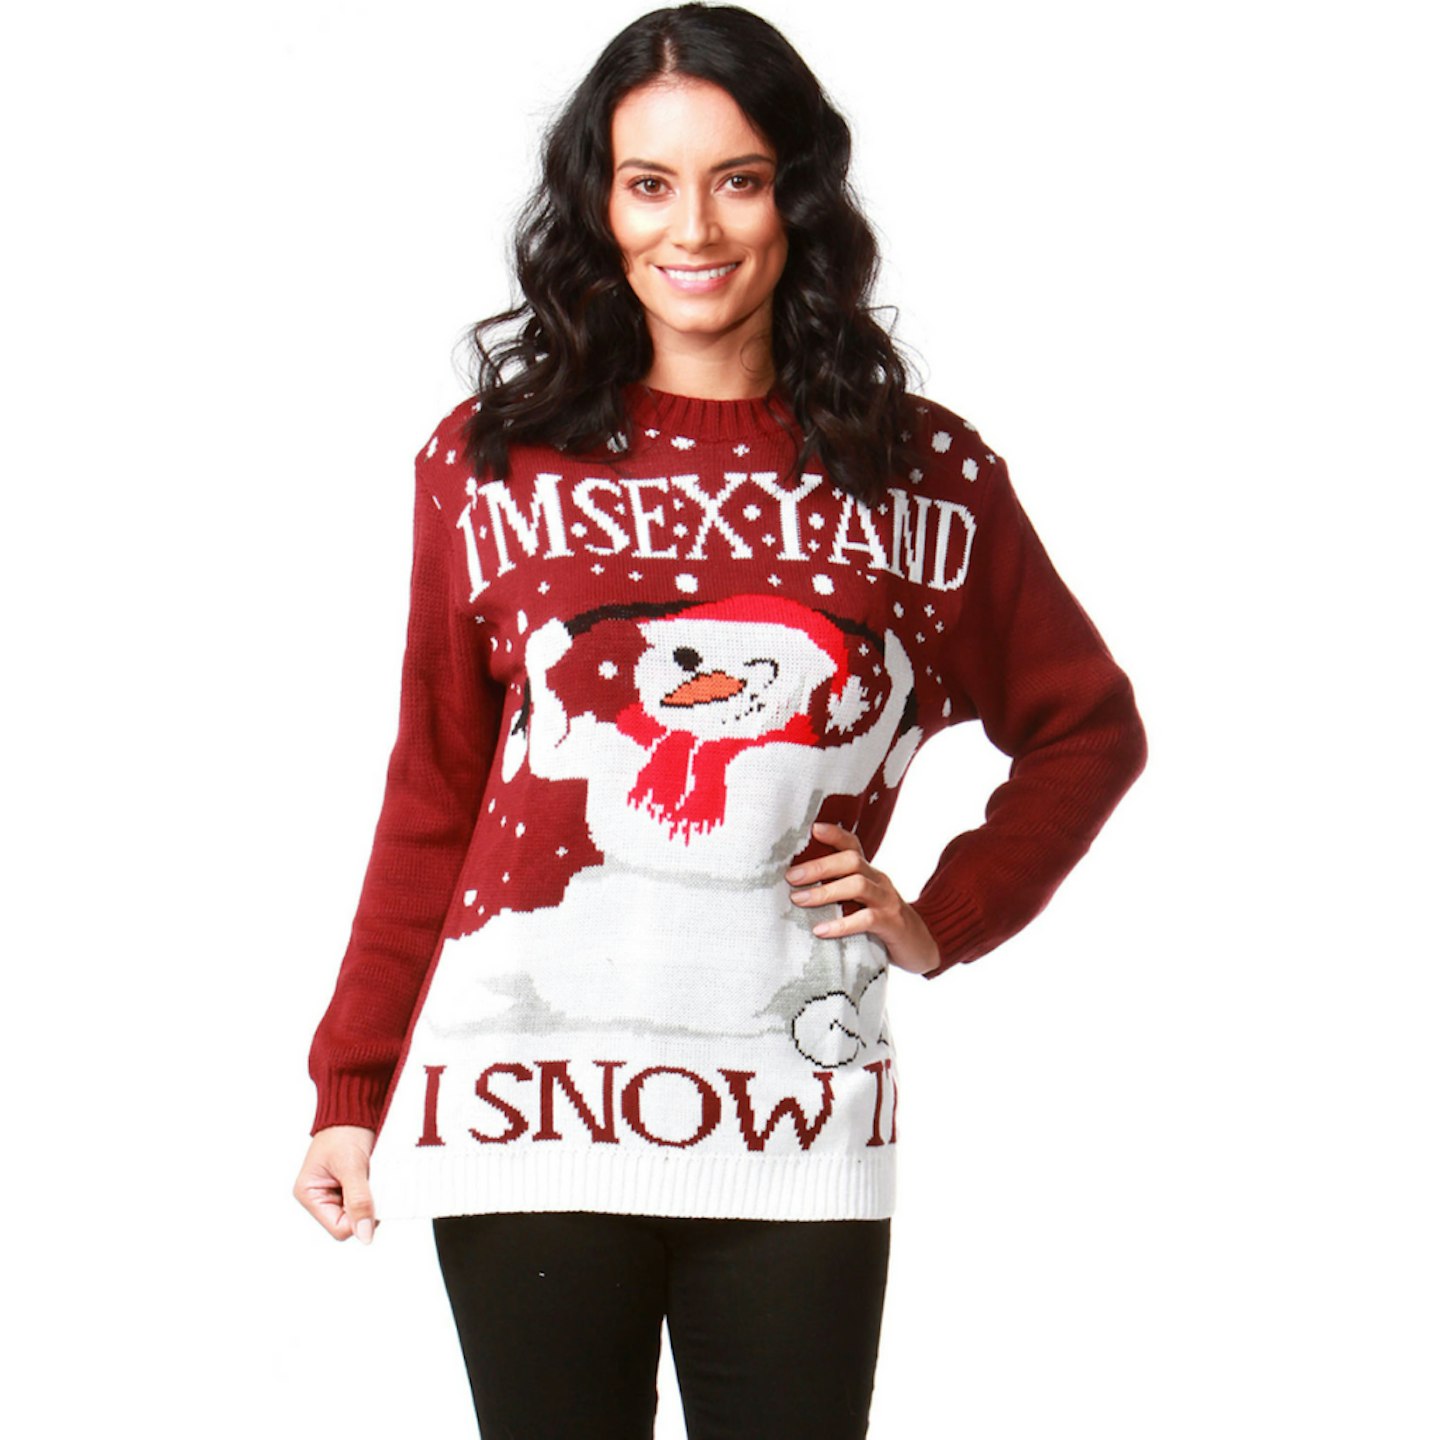 The best rude Christmas jumpers that’ll make you laugh out loud ...